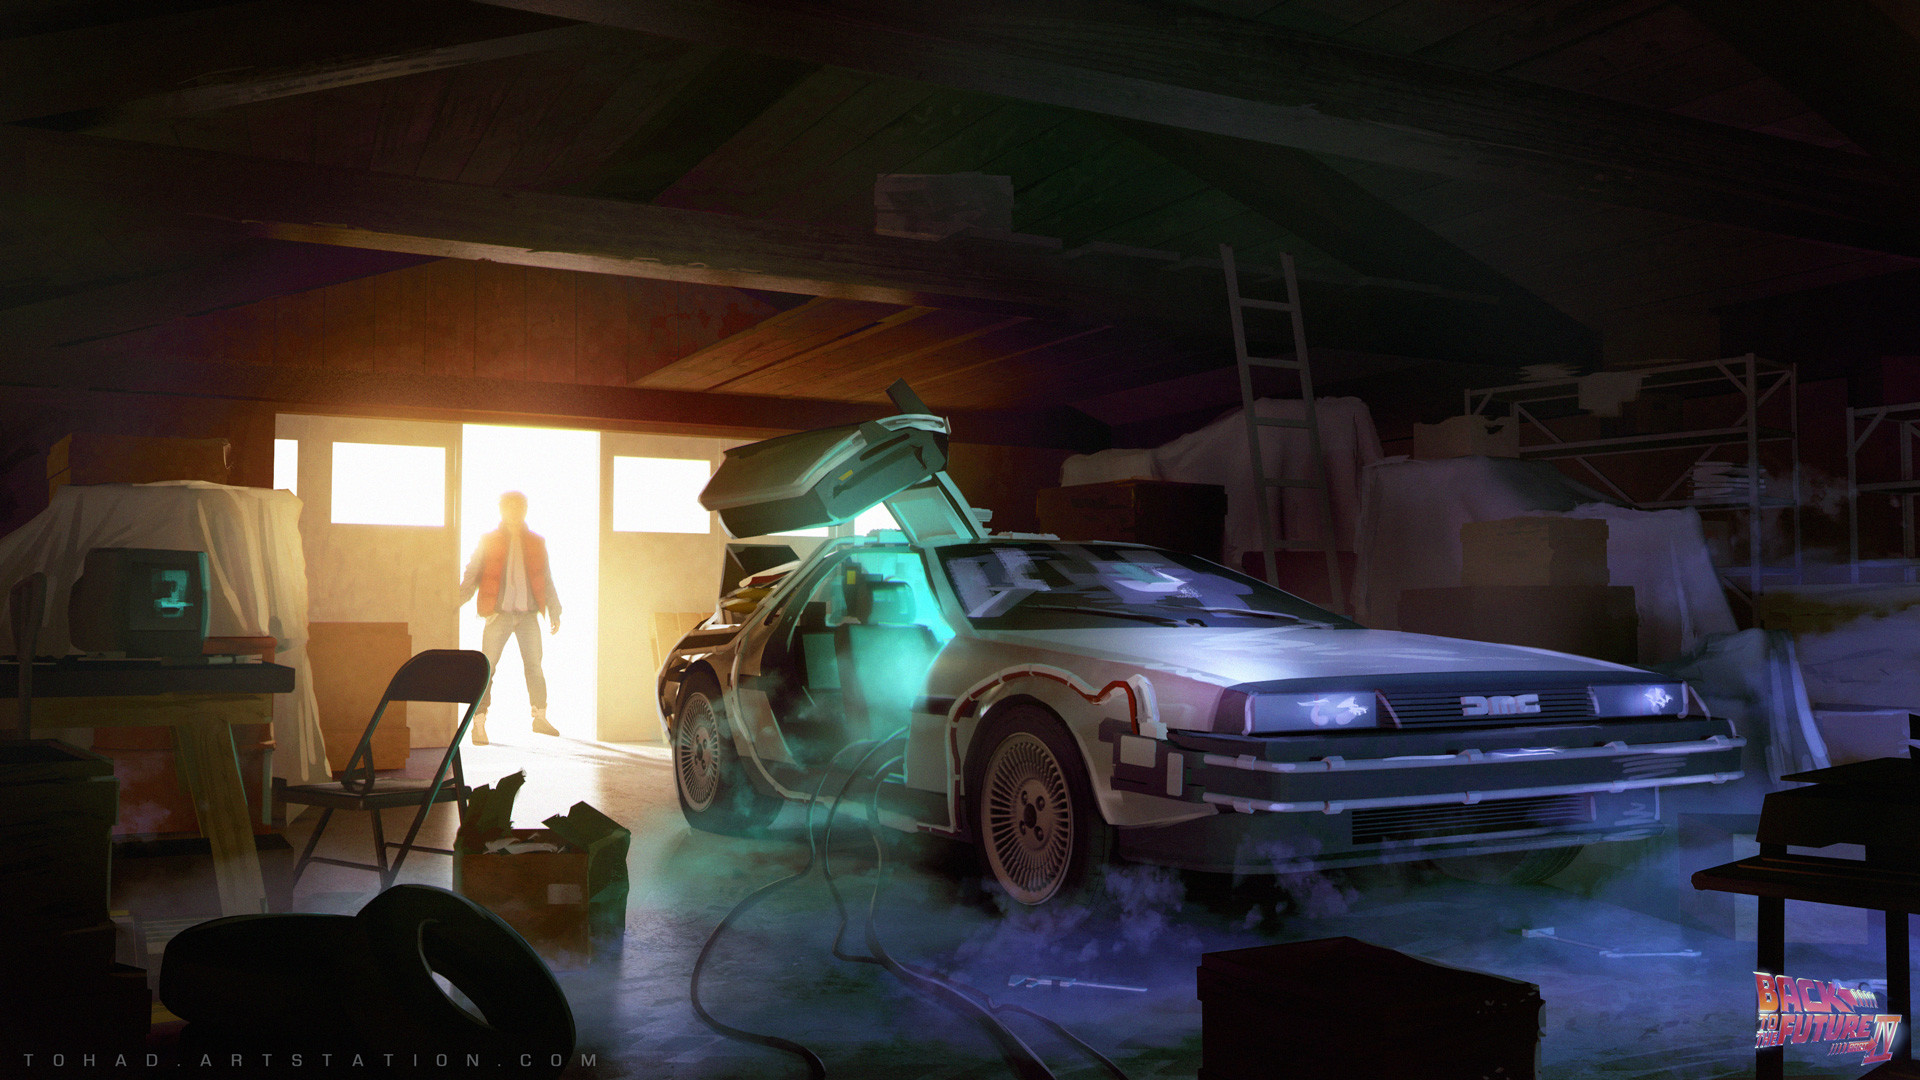 Marty McFly, Magic, Car, DMC DeLorean, Back to the Future Wallpaper HD / Desktop and Mobile Background